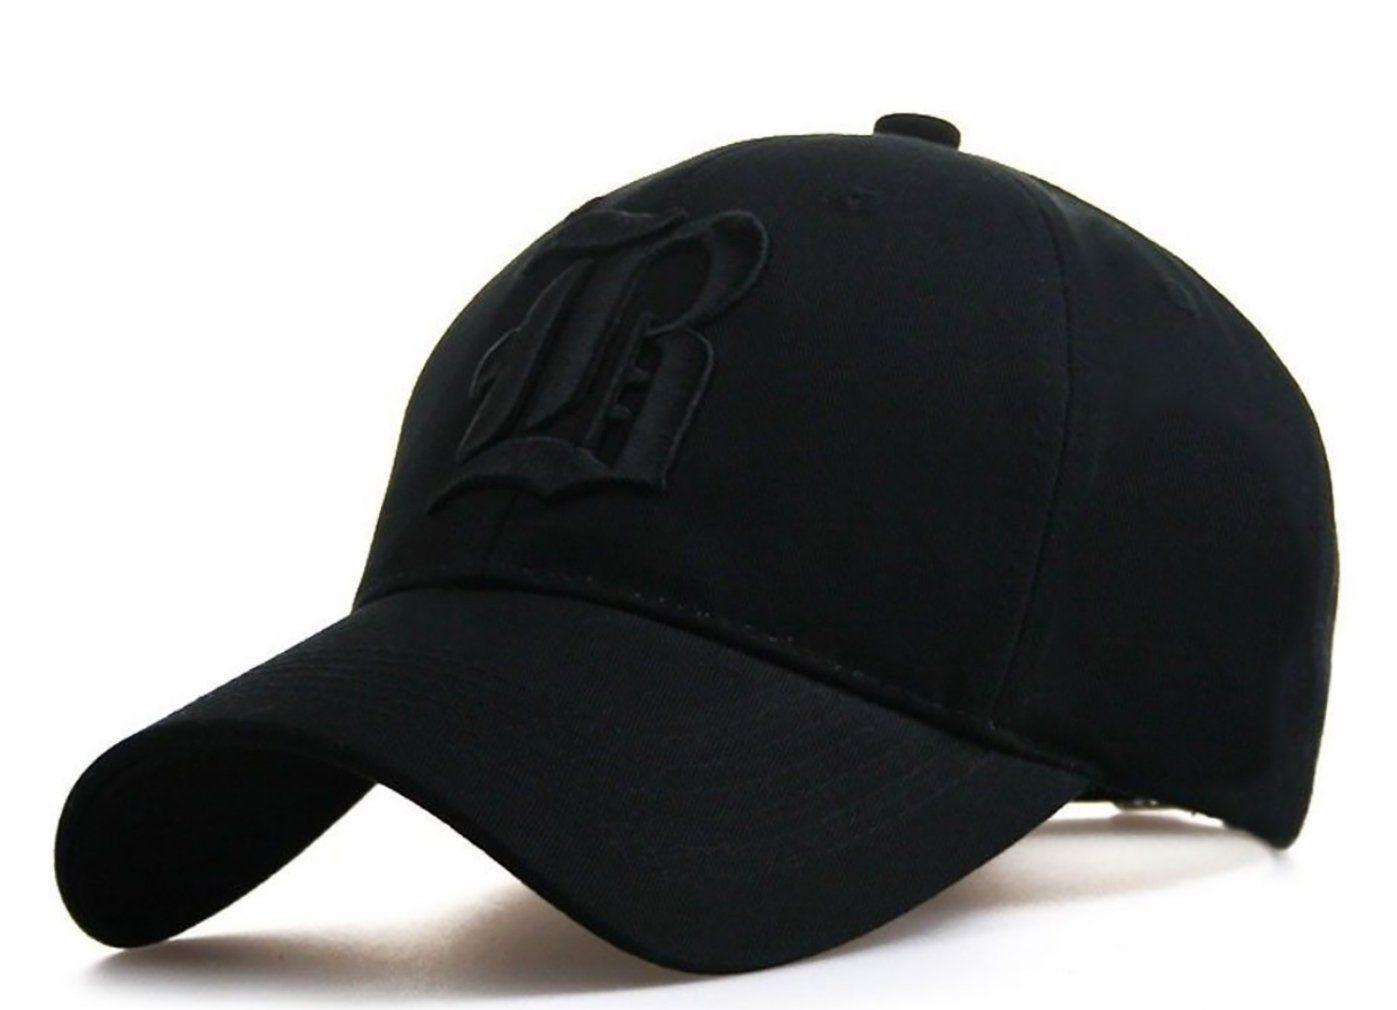 Back to Back Letter B Logo - Officially Casual Baseball Gothic B Letter Cap Caps Snap Back Hat ...